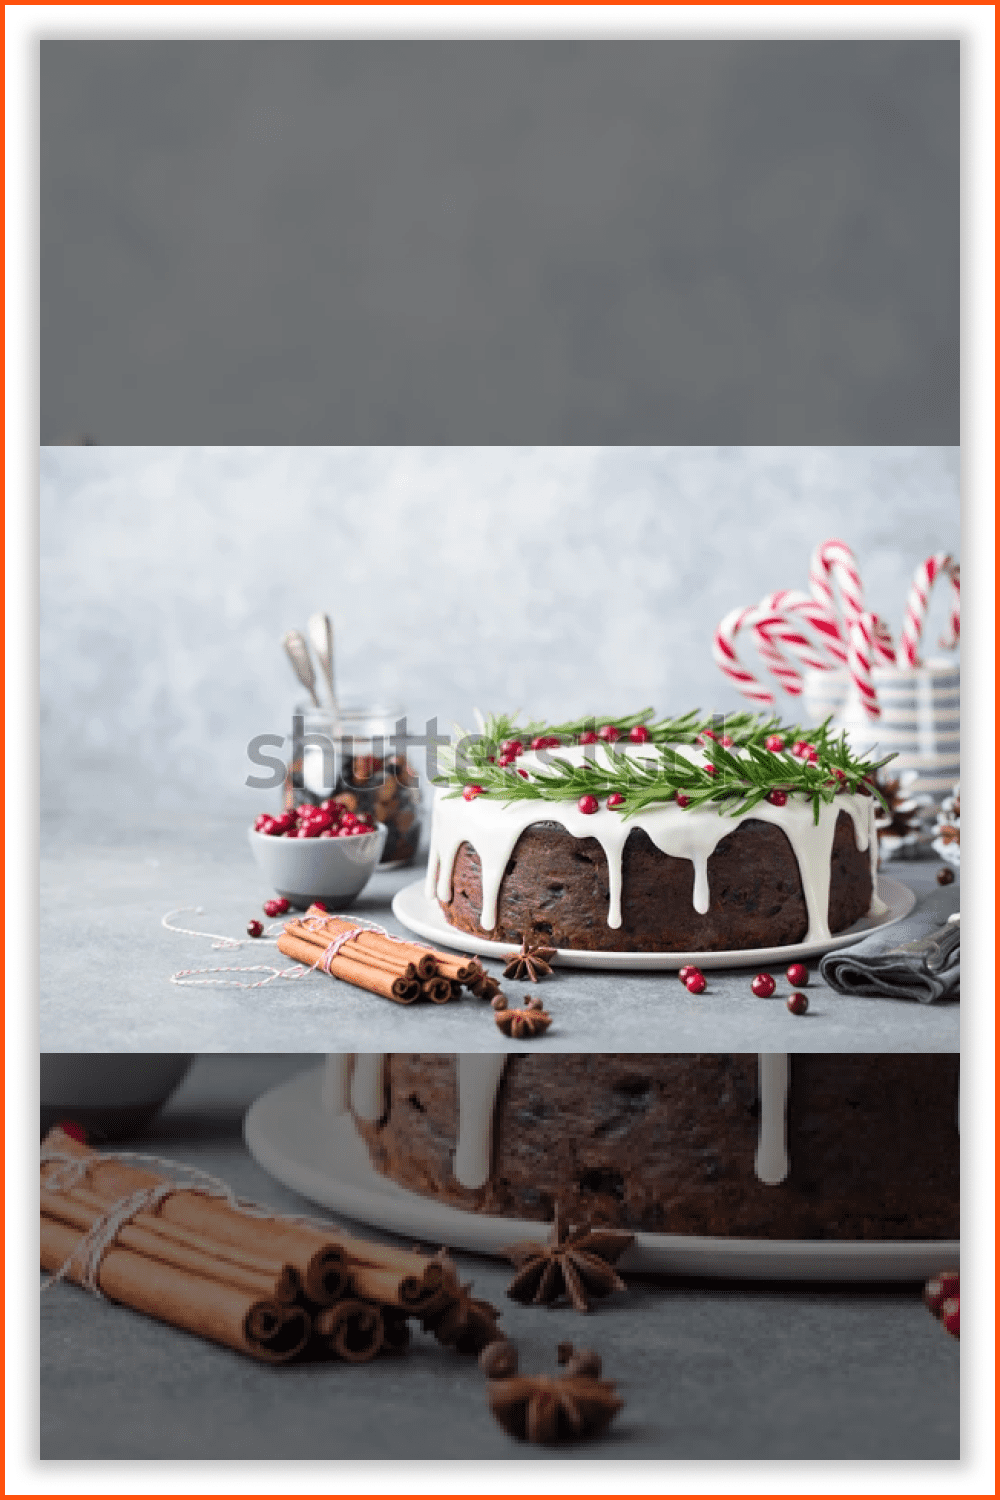 A tasty chocolate cake with icing and cranberries.